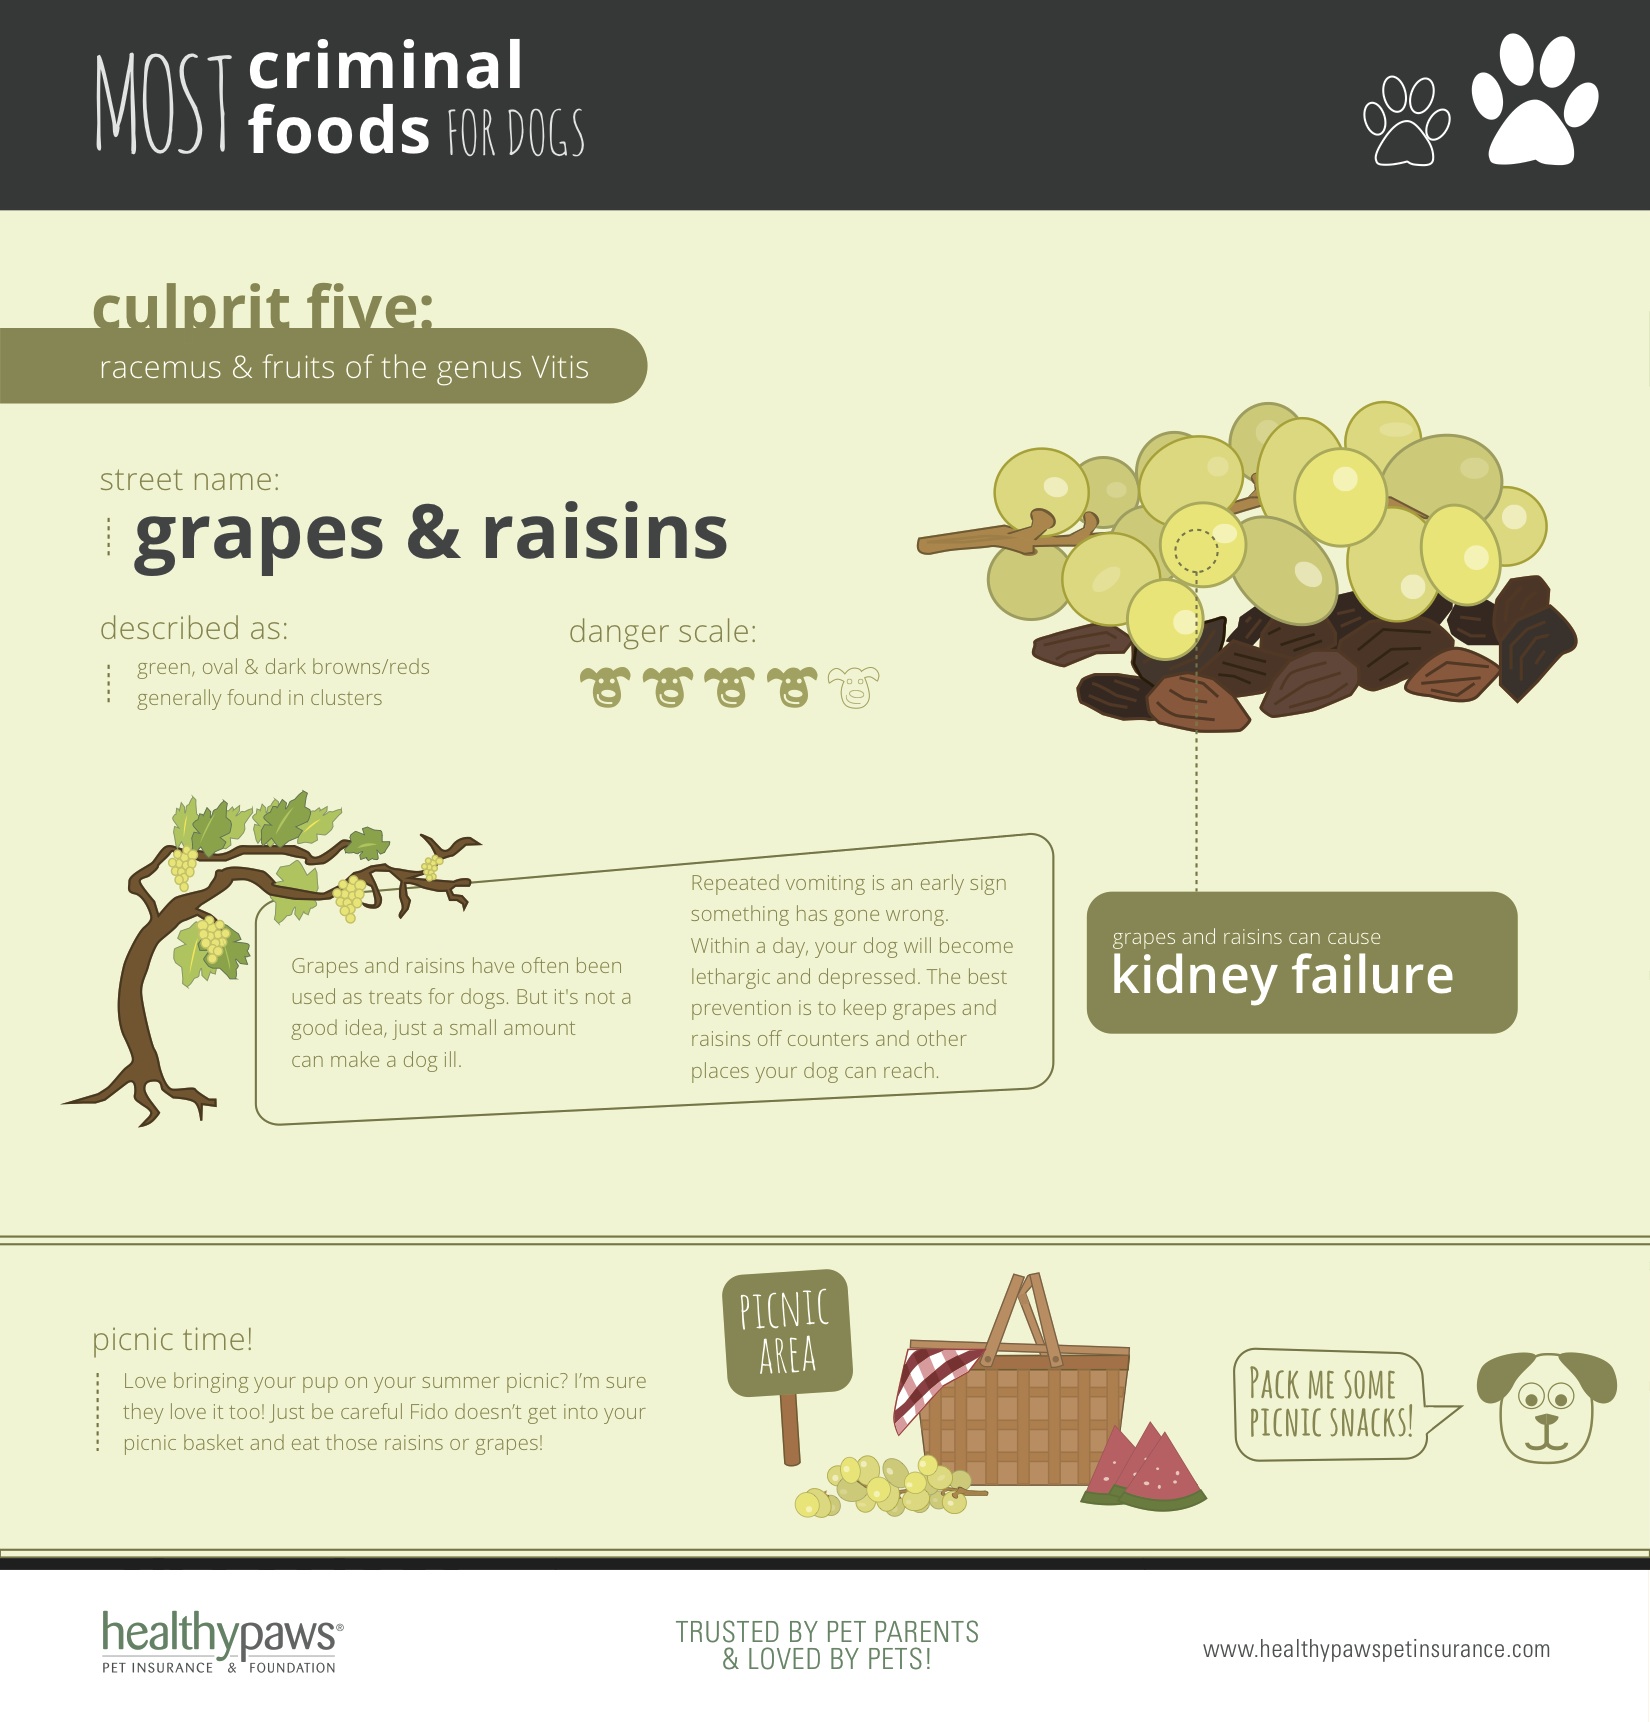 why are raisins so bad for dogs